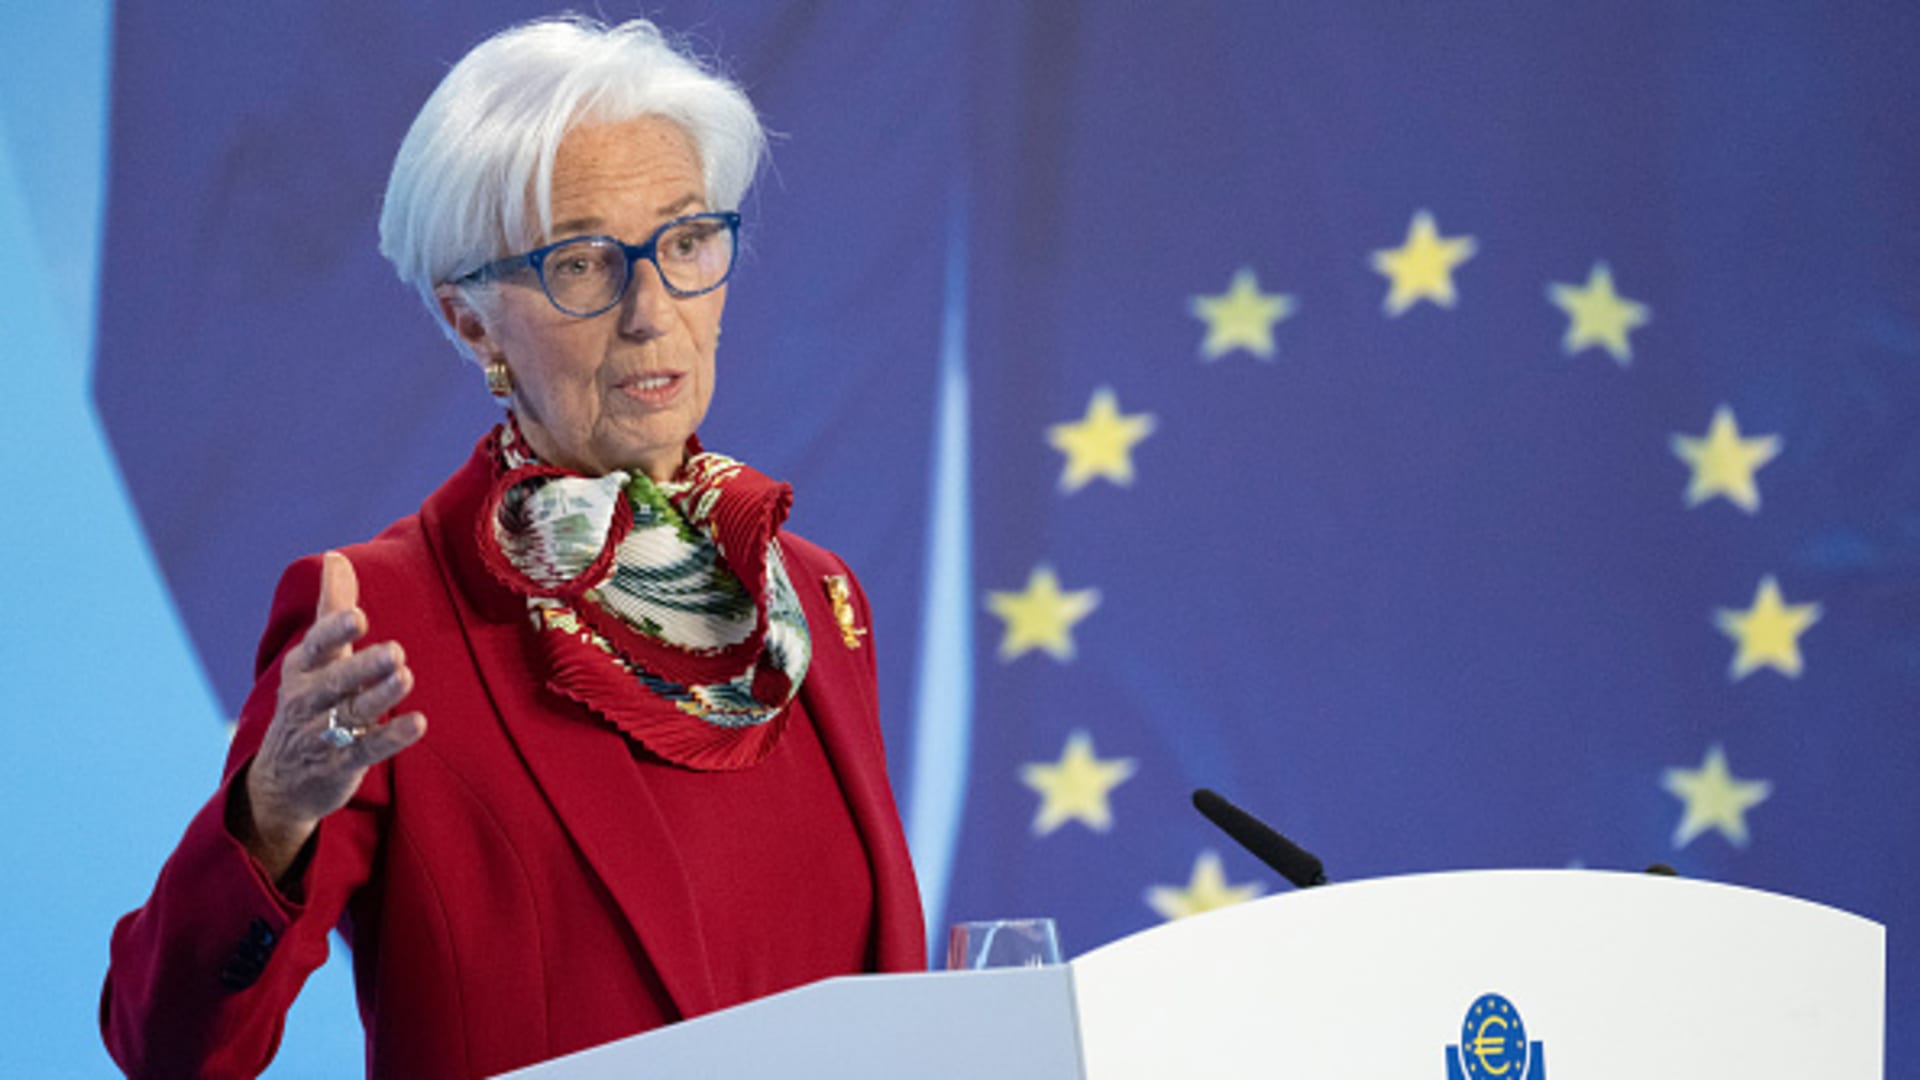 Christine Lagarde, President of the European Central Bank (ECB) speaks at a press conference following the Bank's latest Governing Council meeting.